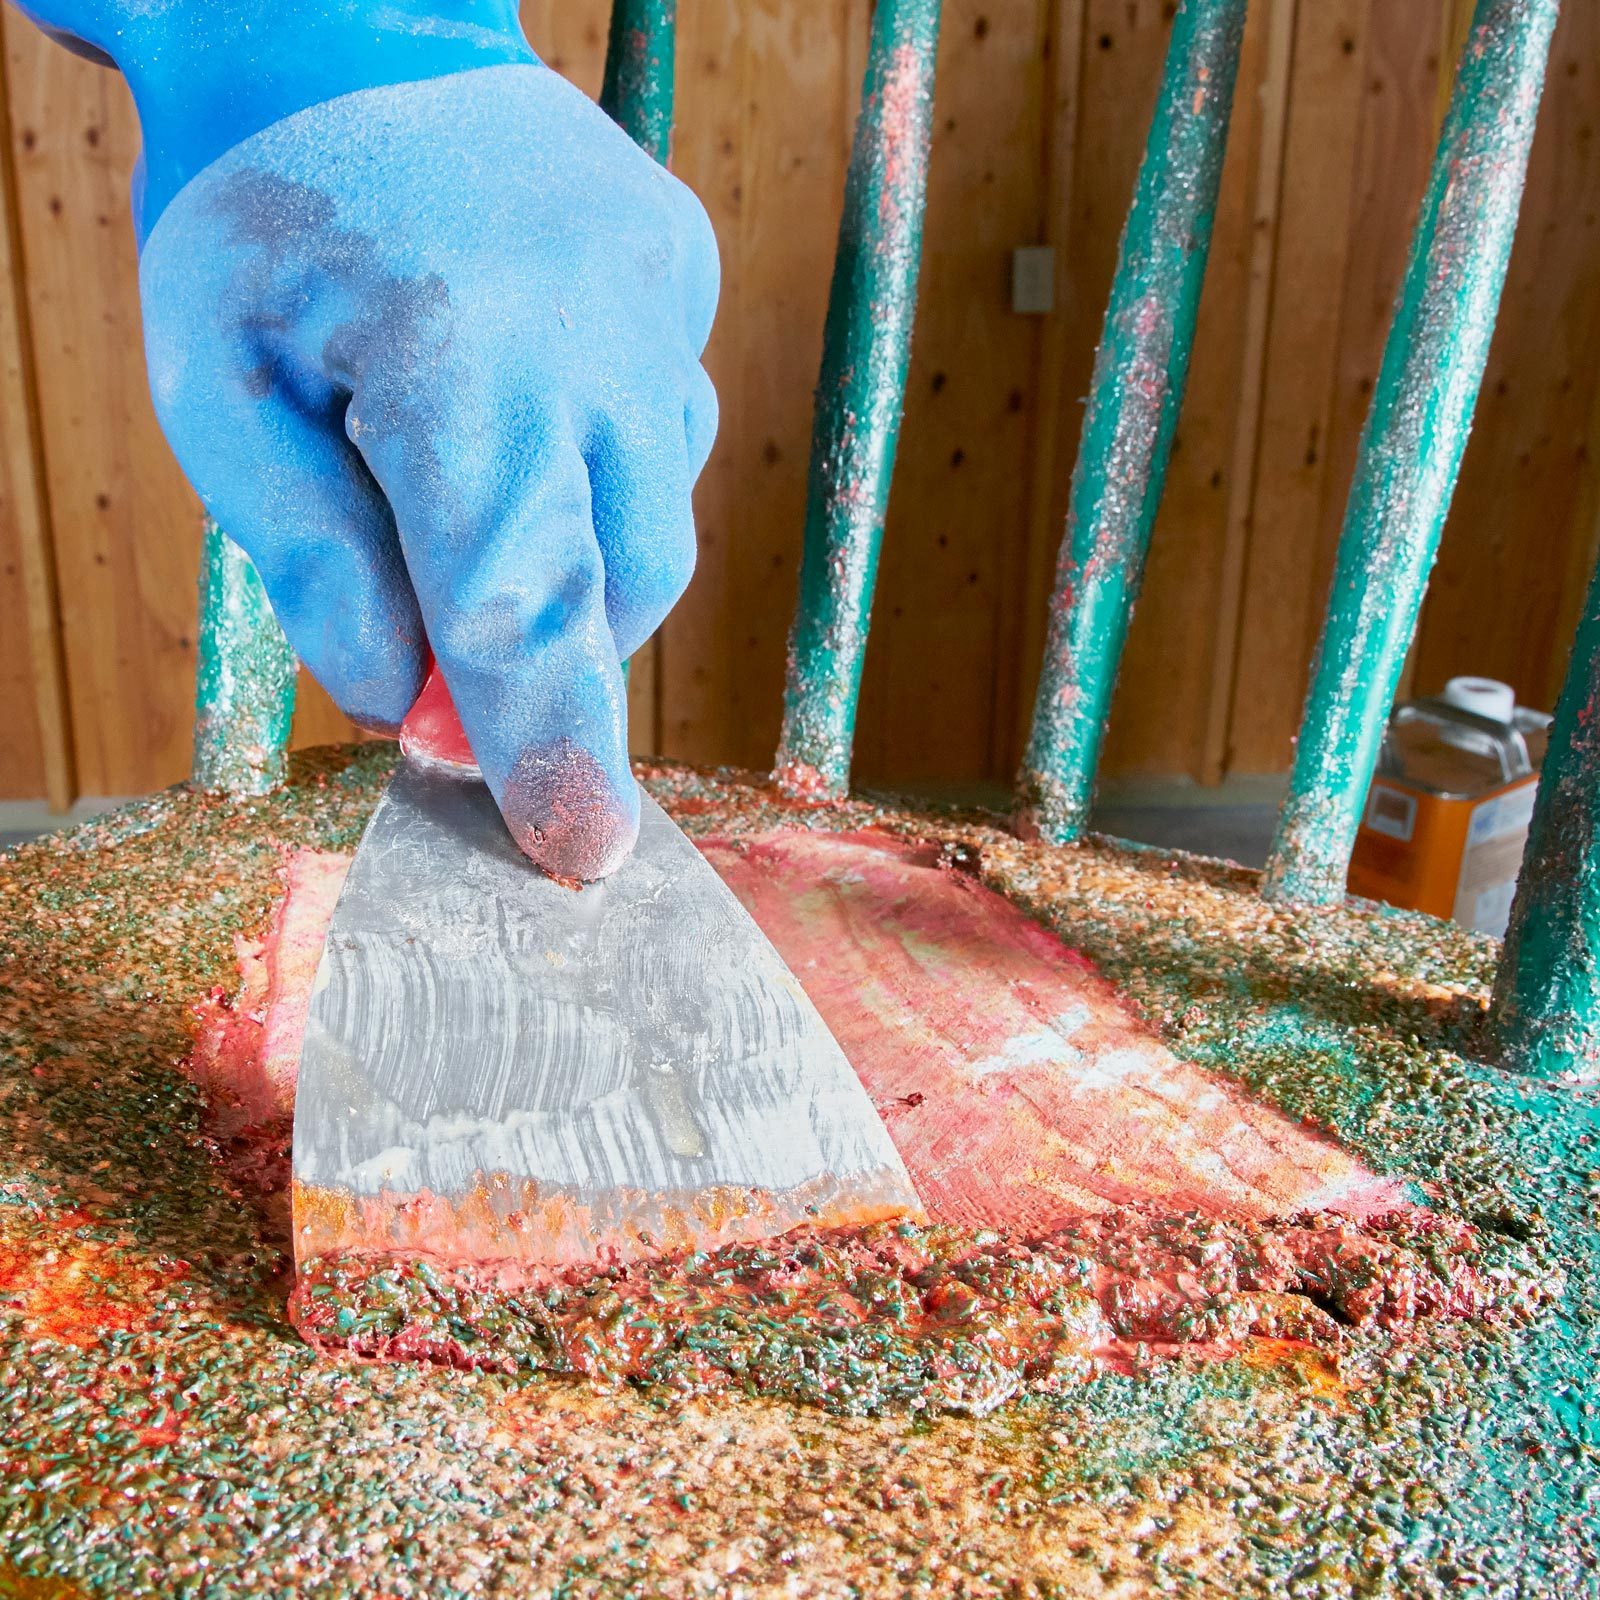 Removing Paint From Wood Furniture